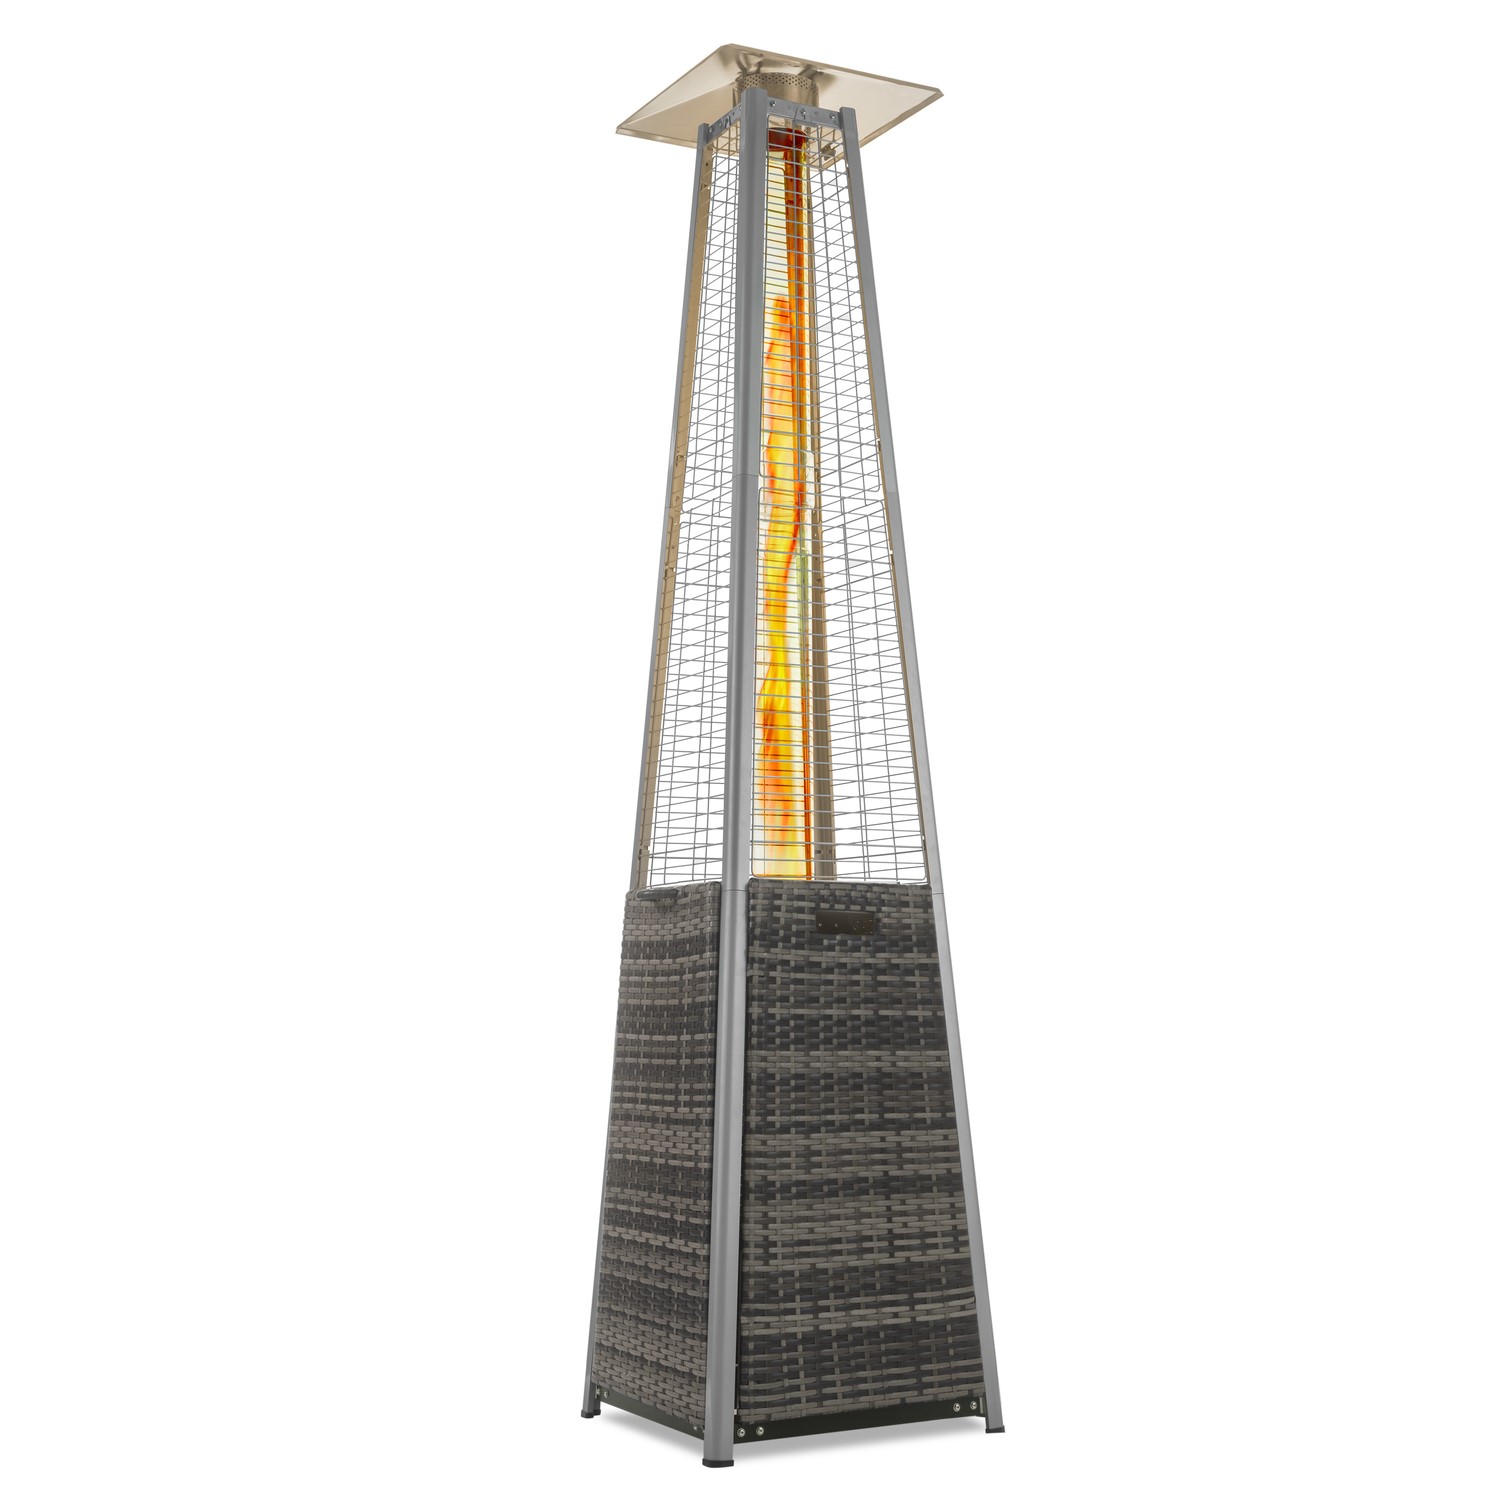 Pyramid Flame Tower Outdoor Gas Patio Heater - Grey Rattan/Wicker with Free Cover